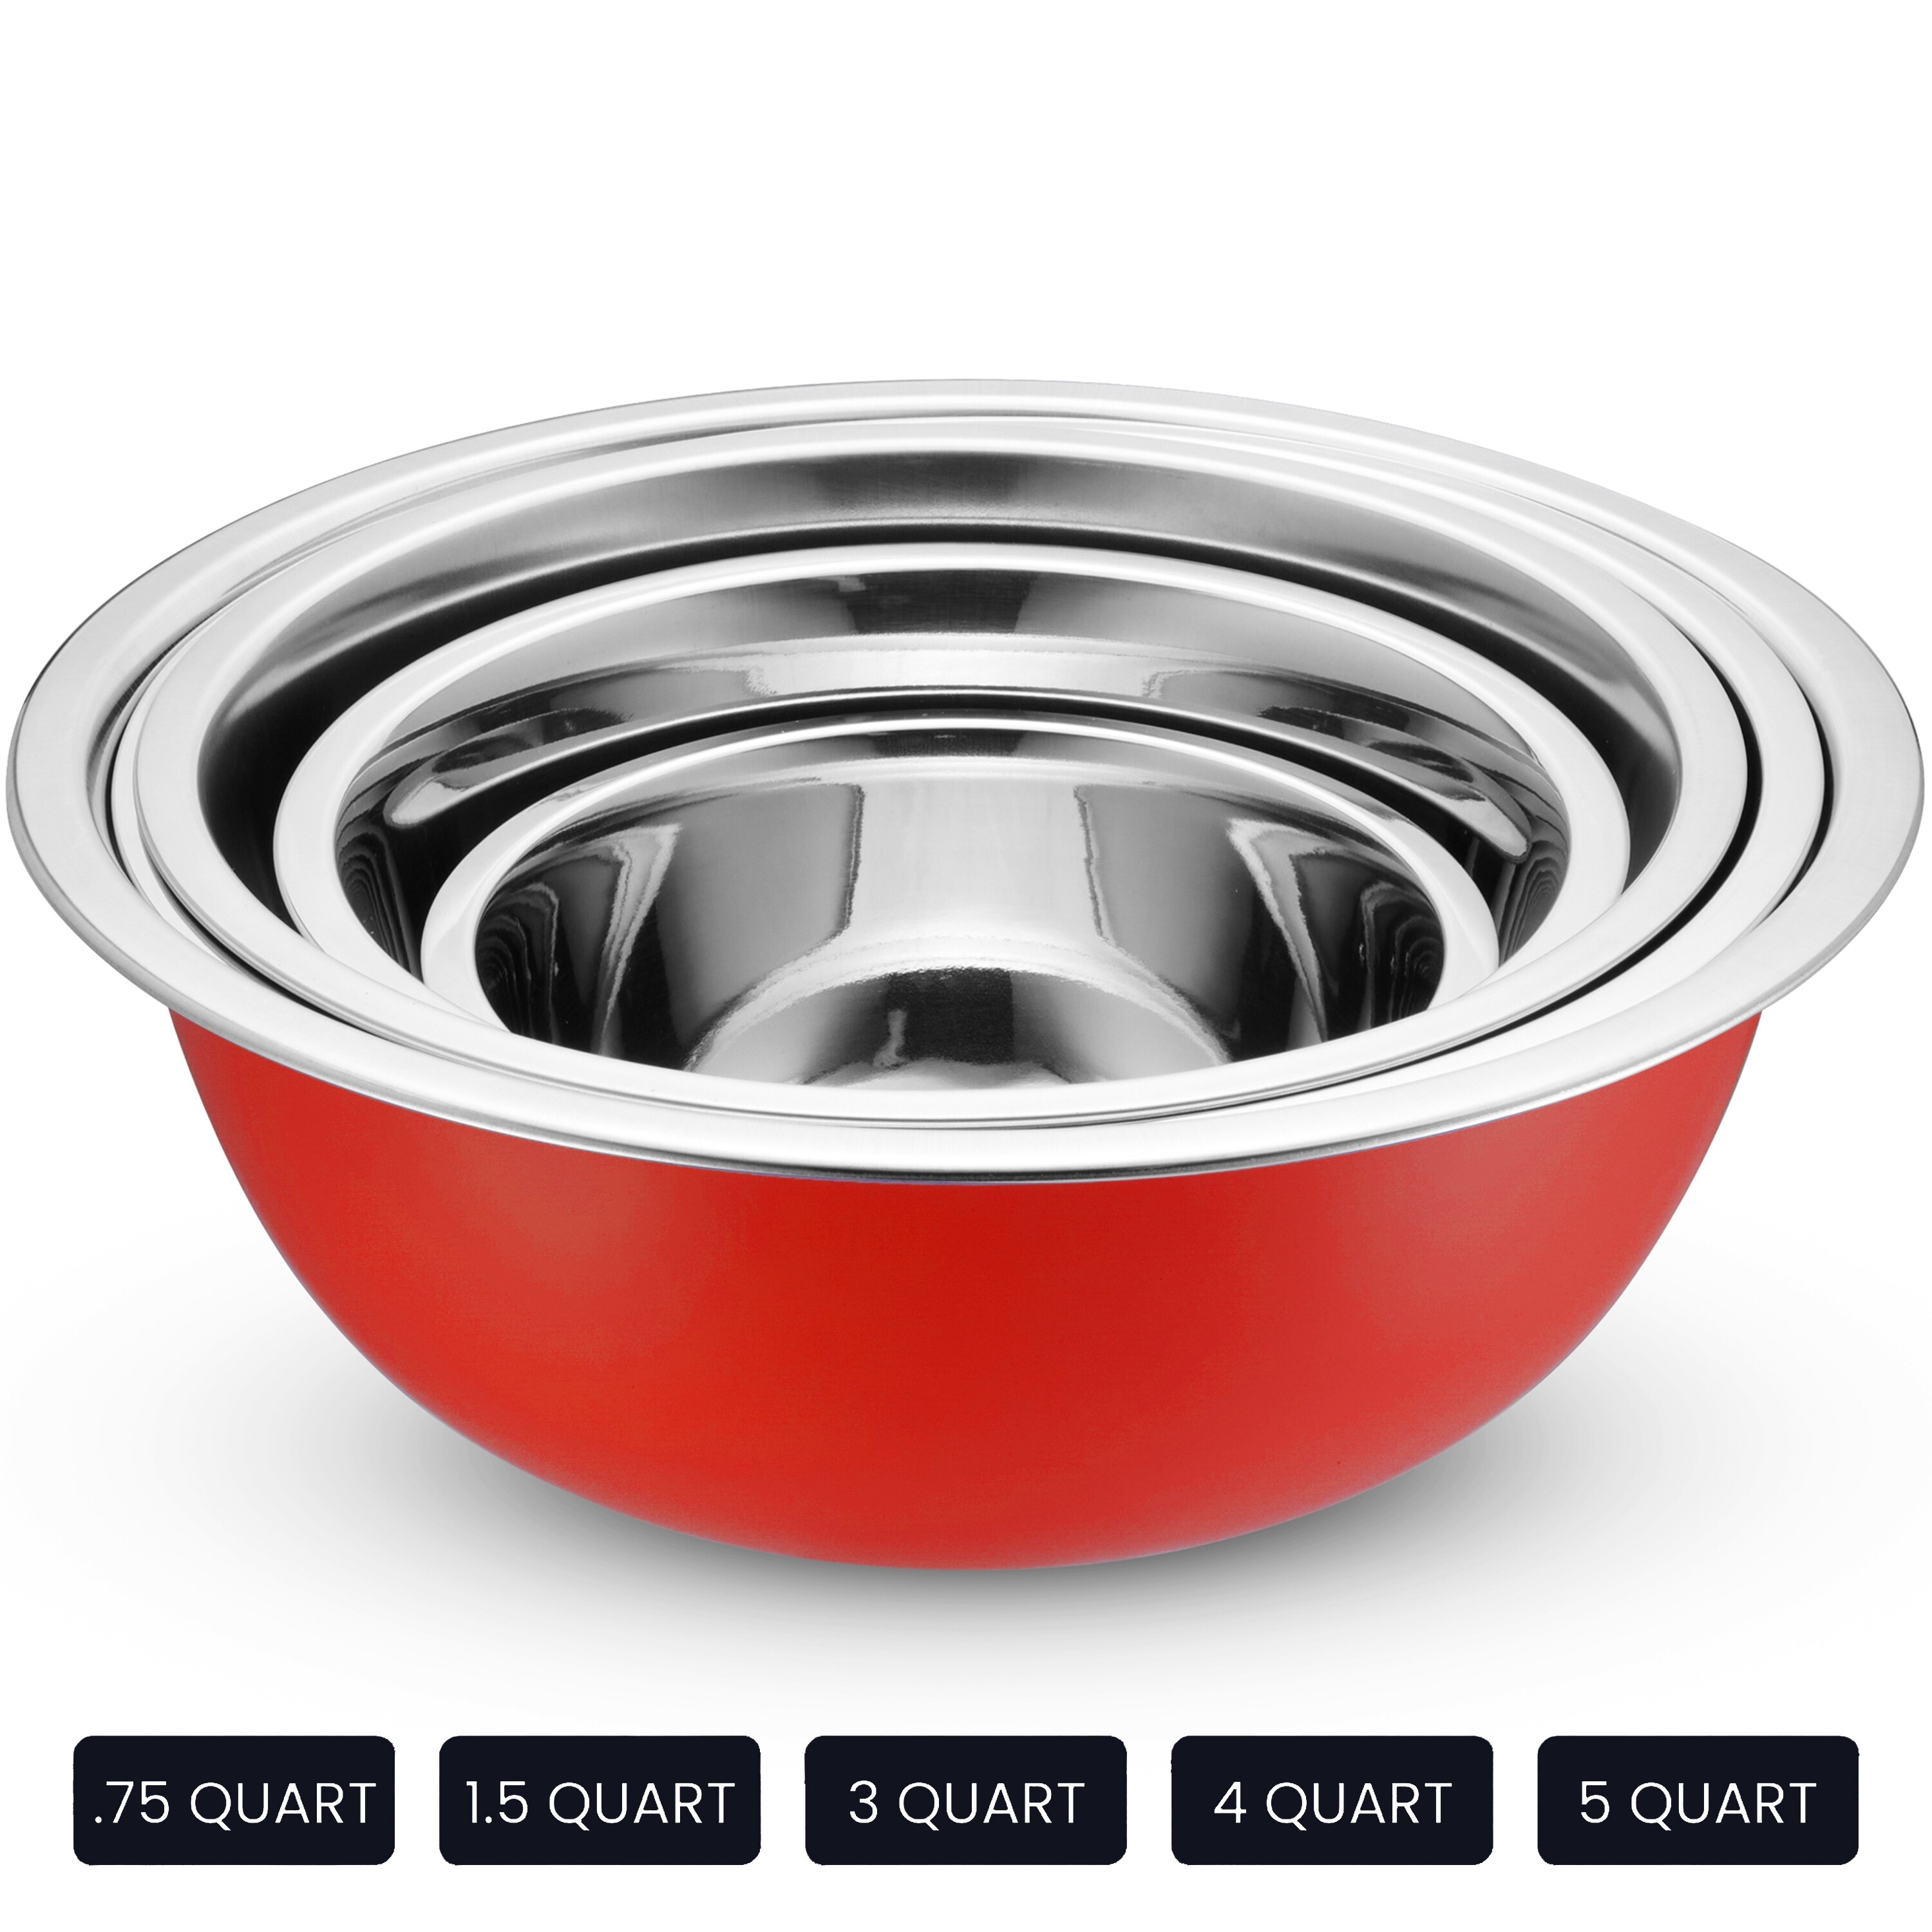 https://ak1.ostkcdn.com/images/products/is/images/direct/bb8757e5aae56f7c048b65602b01da21fd087cec/Heavy-Duty-Meal-Prep-Stainless-Steel-Mixing-Bowls-Set-with-Lids.jpg